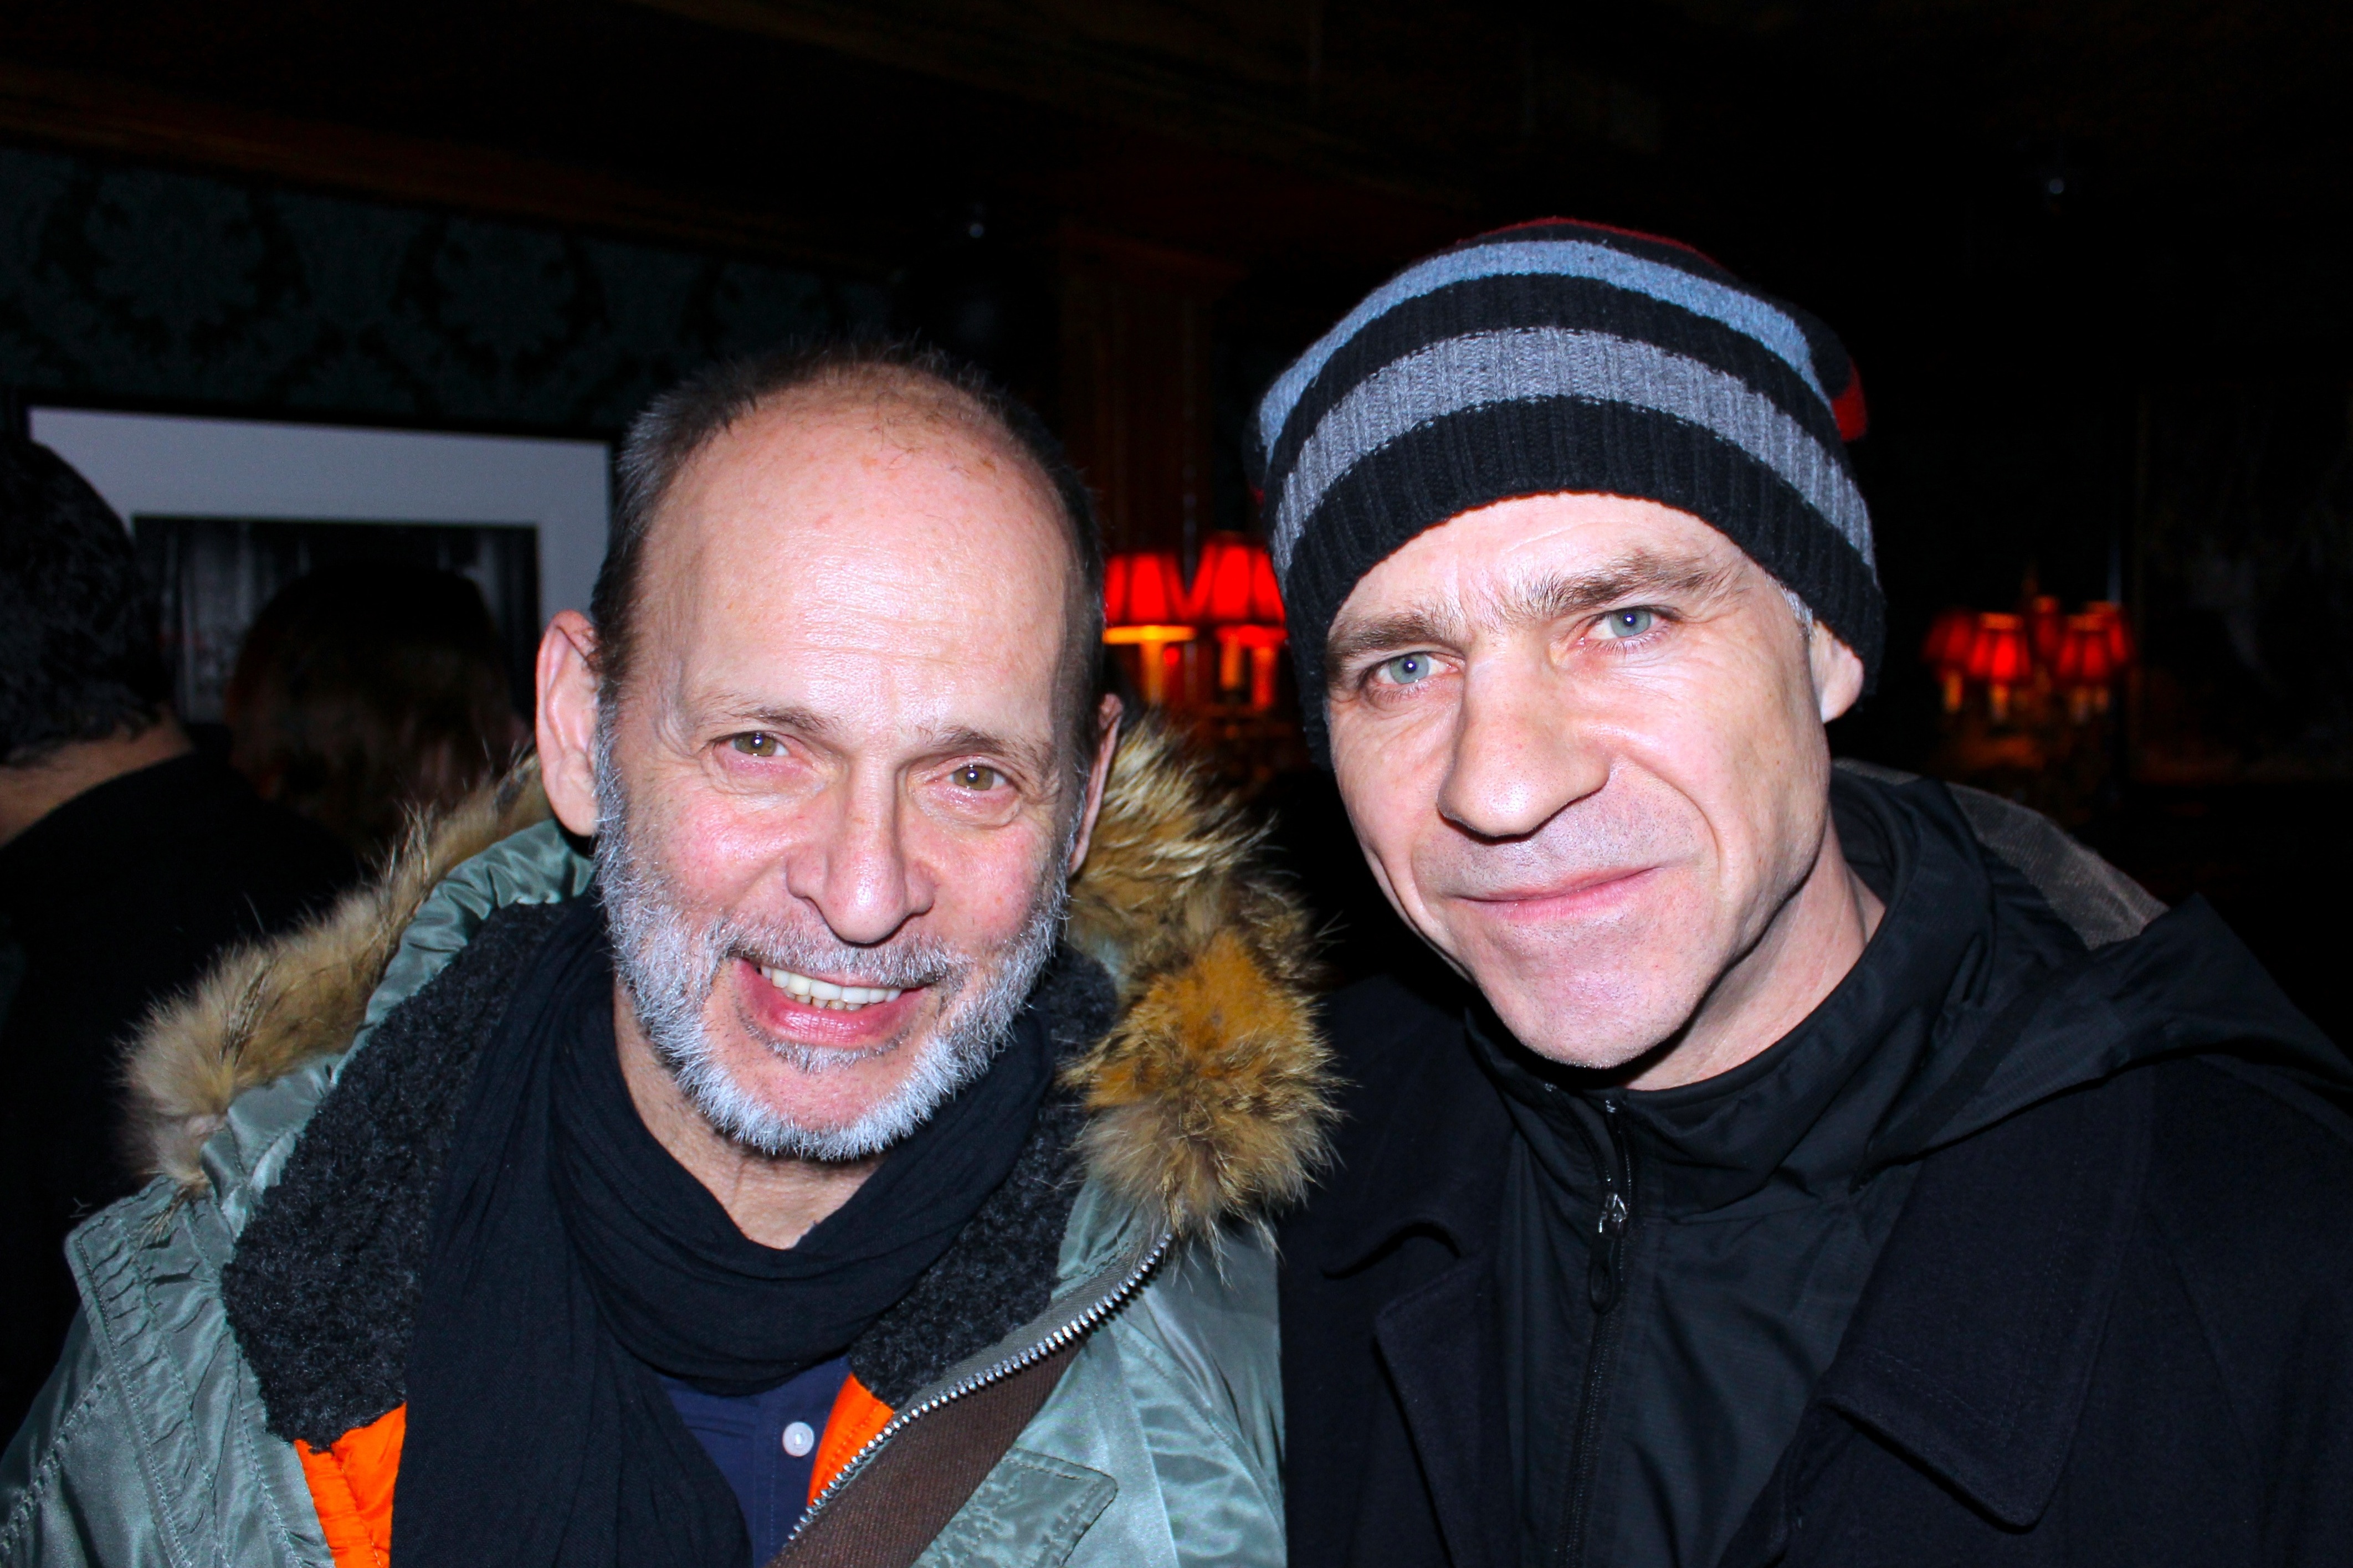 MC5 guitarist Wayne Kramer and composer Ronan Coleman attend the theatrical debut of The Mind Of Mark DeFriest